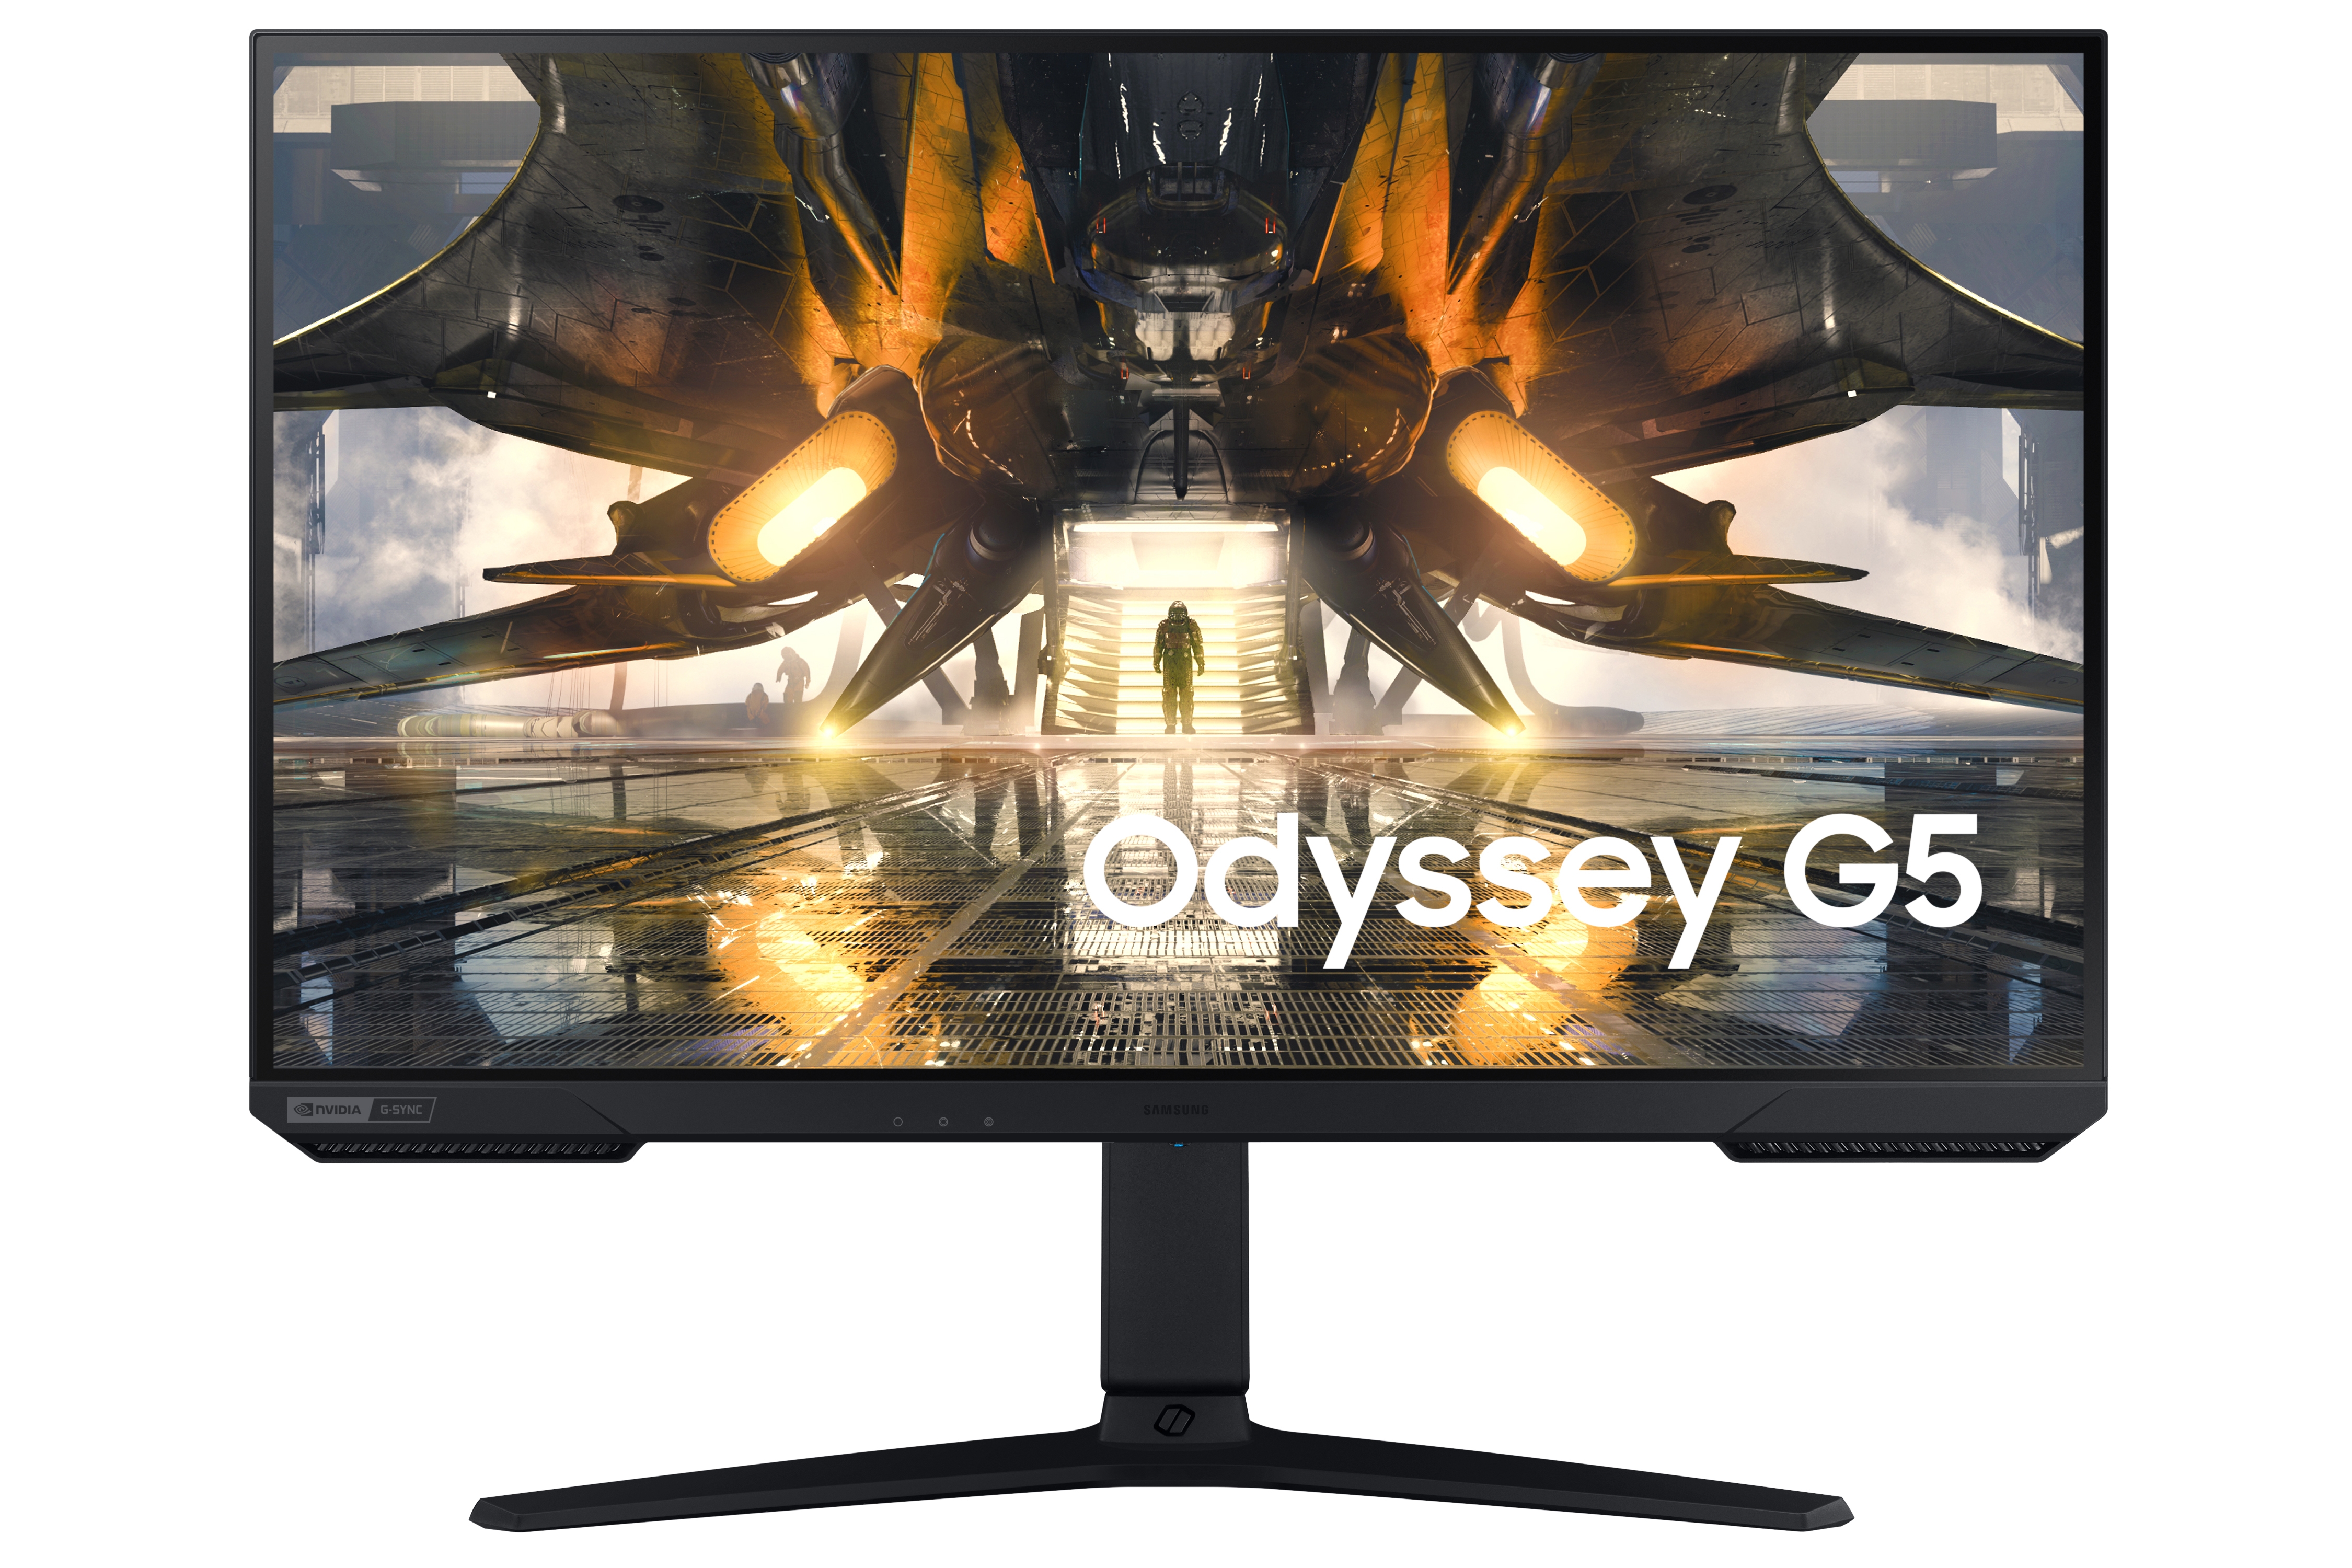 Samsung education store: 27" Odyssey G52A QHD IPS 165Hz 1ms G-Sync Compatible HDR400 Gaming Monitor $214.99